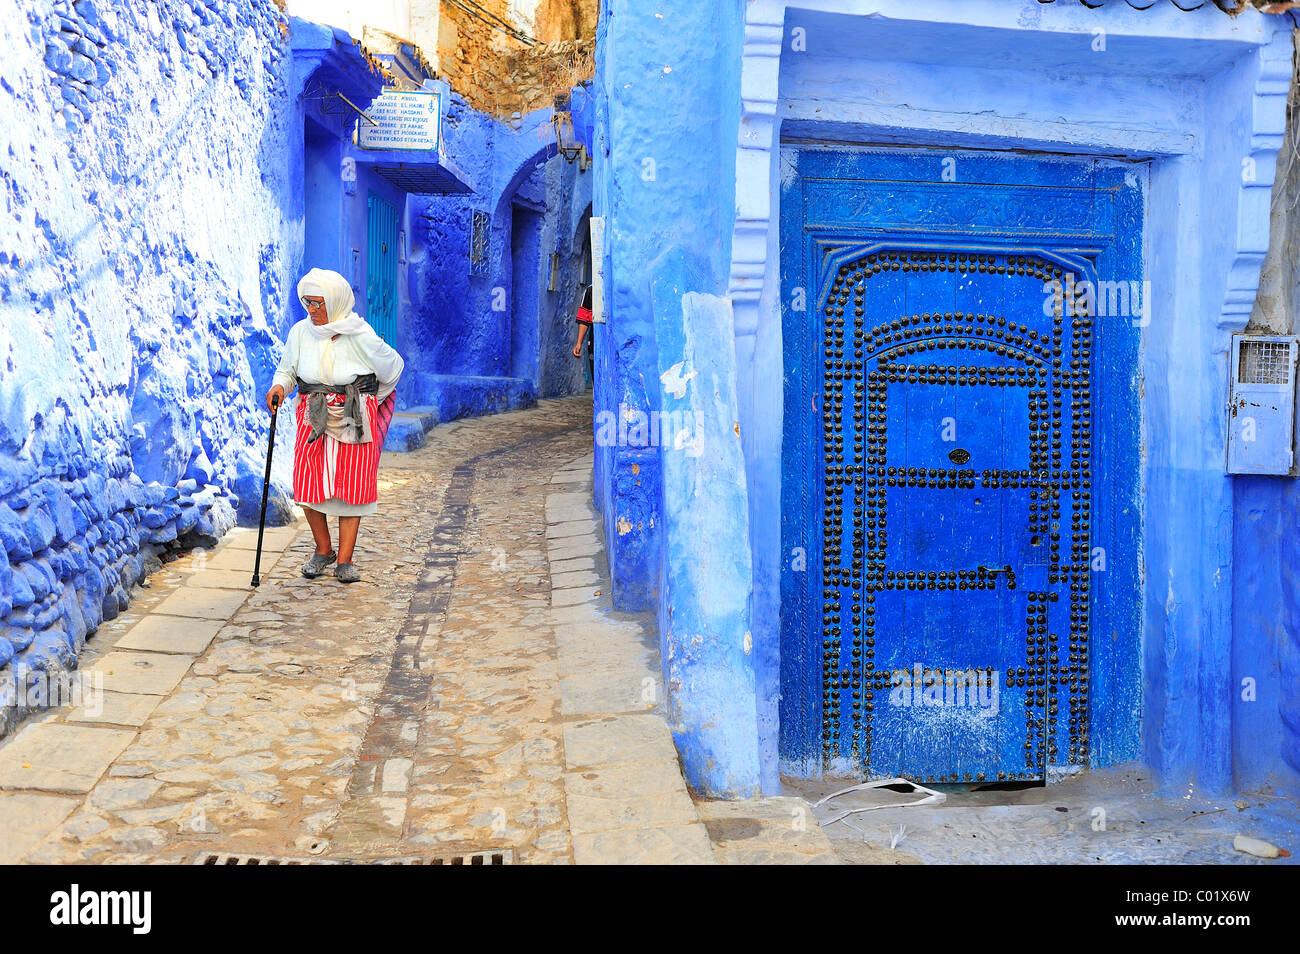 An old woman walking in a narrow alley with blue painted walls and doors in the Medina, old town, Chefchaouen, Rif Mountains Stock Photo